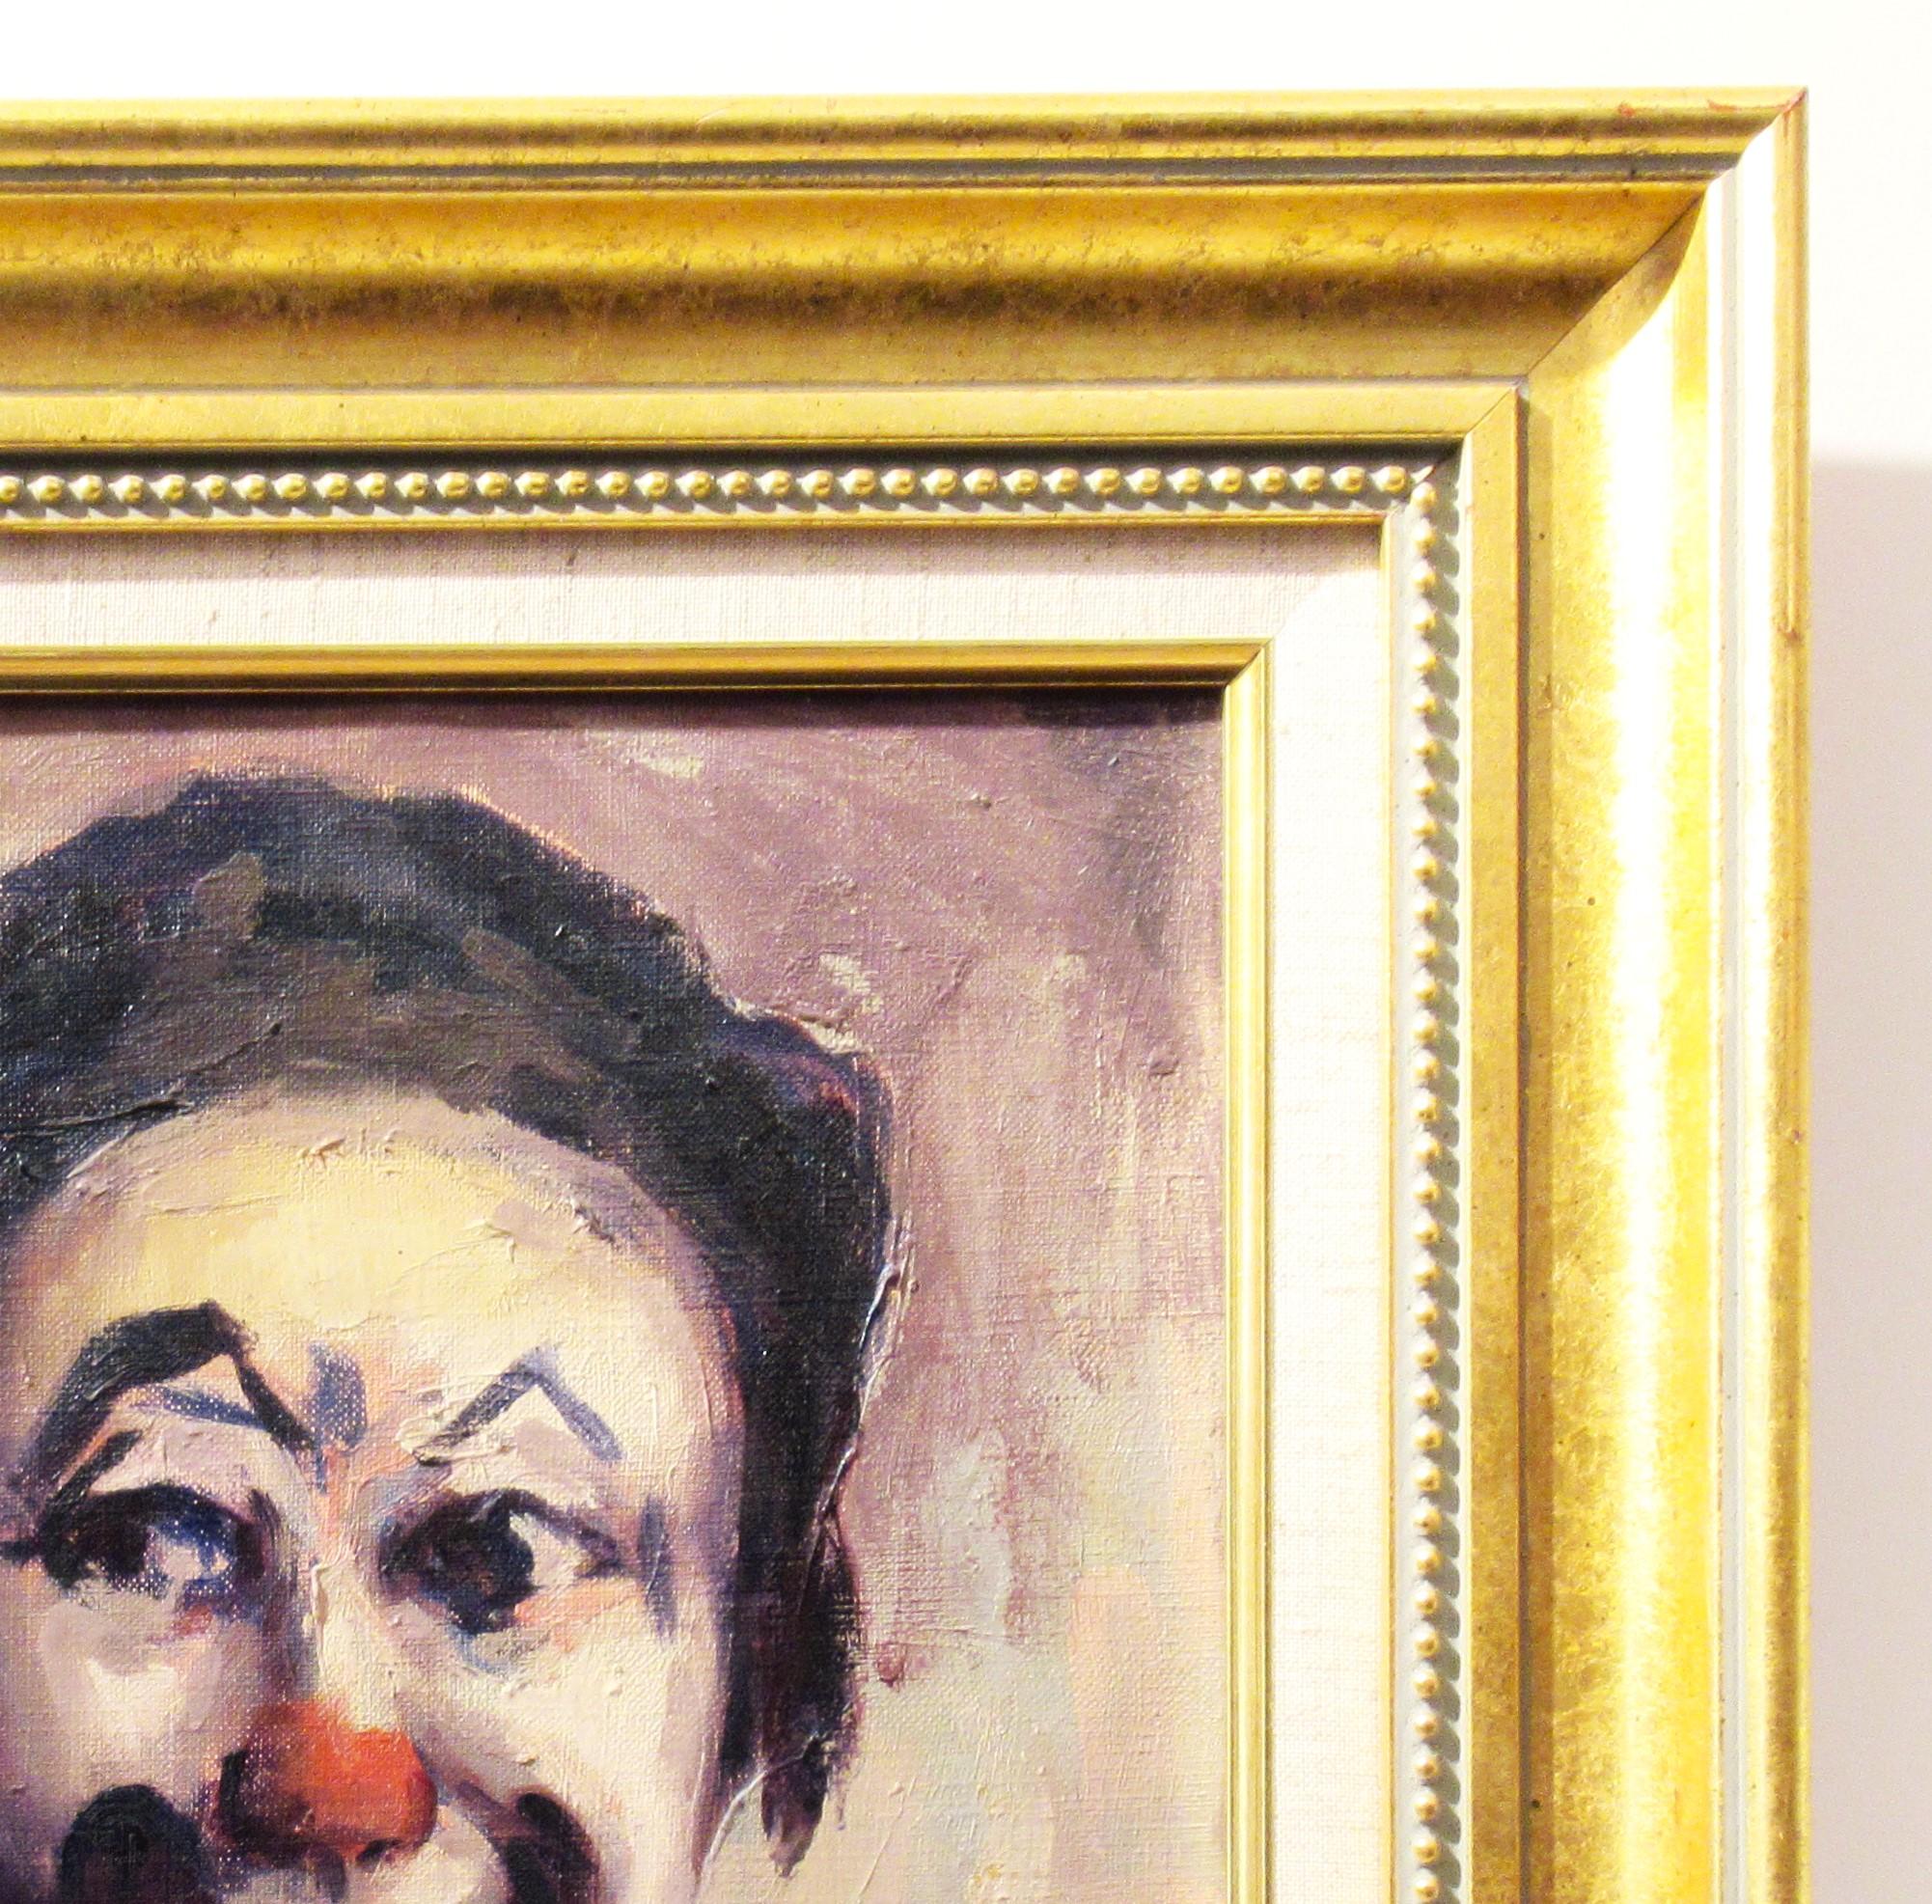 Clown, Medrano Circus, France - American Impressionist Painting by Benton Scott